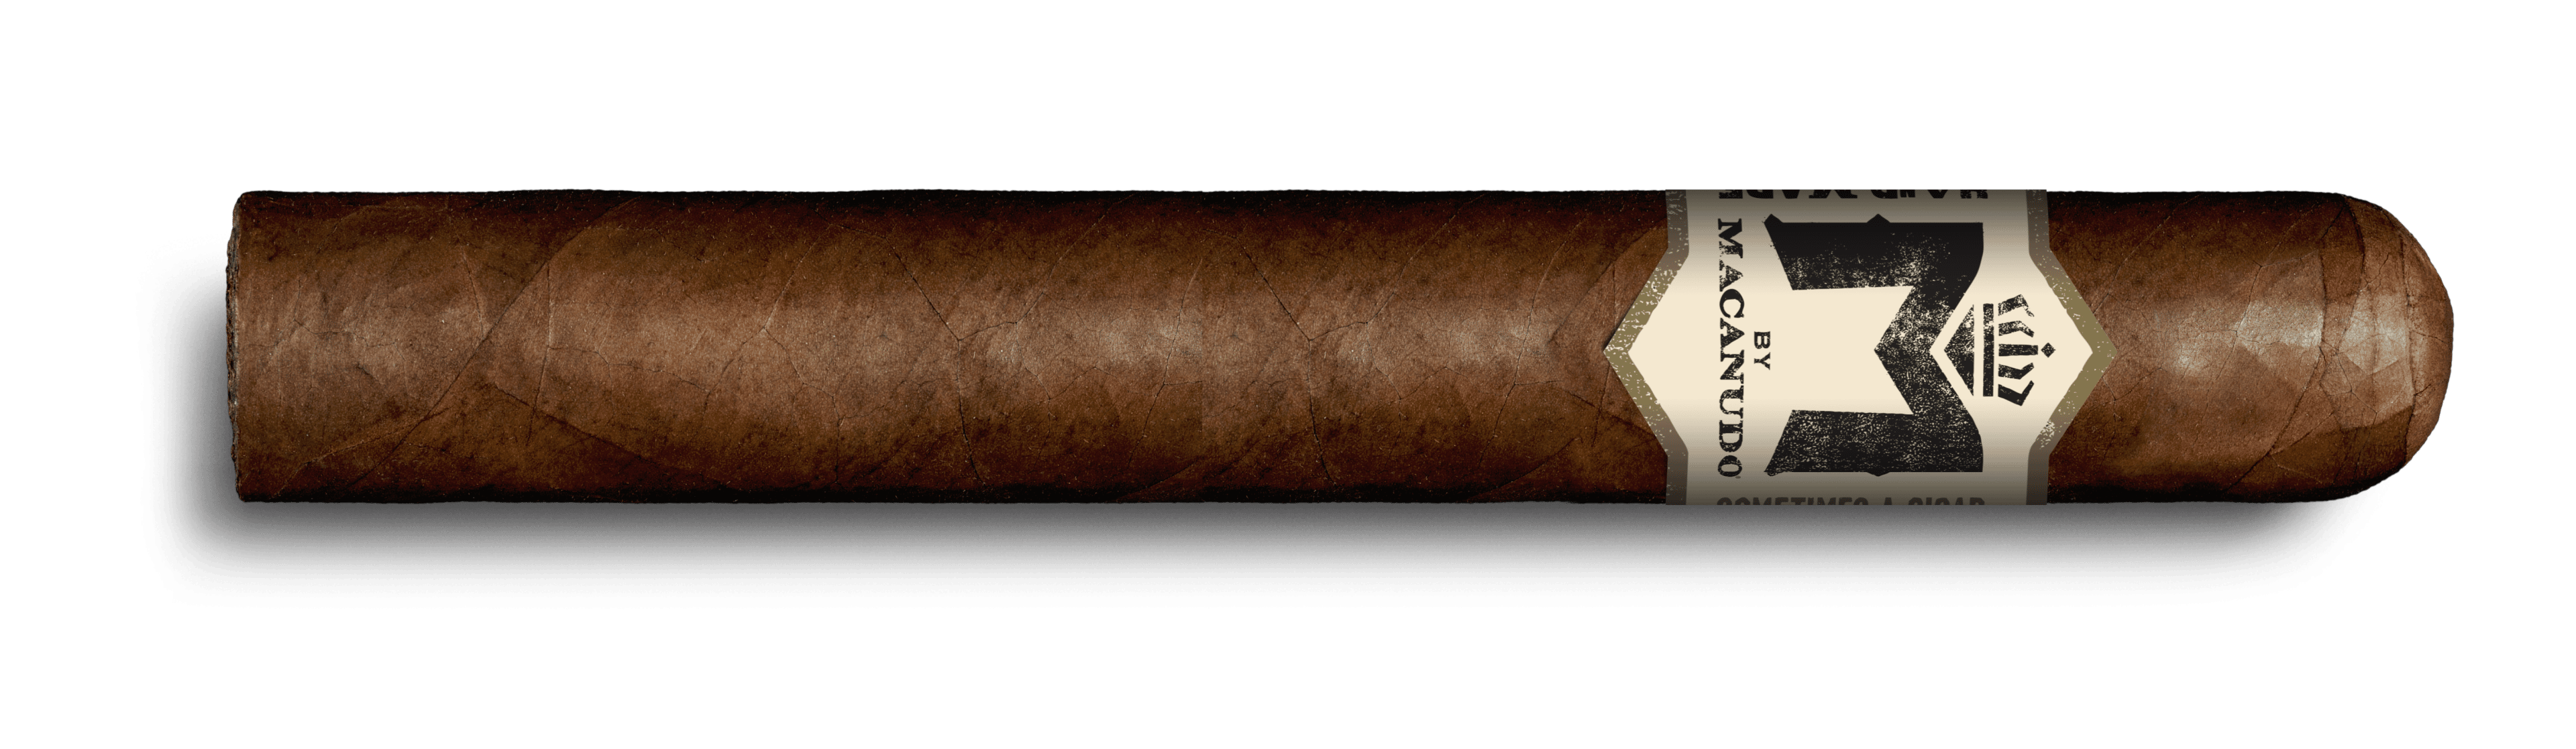 M by Macanudo Adds Three New Flavors - Cigar News